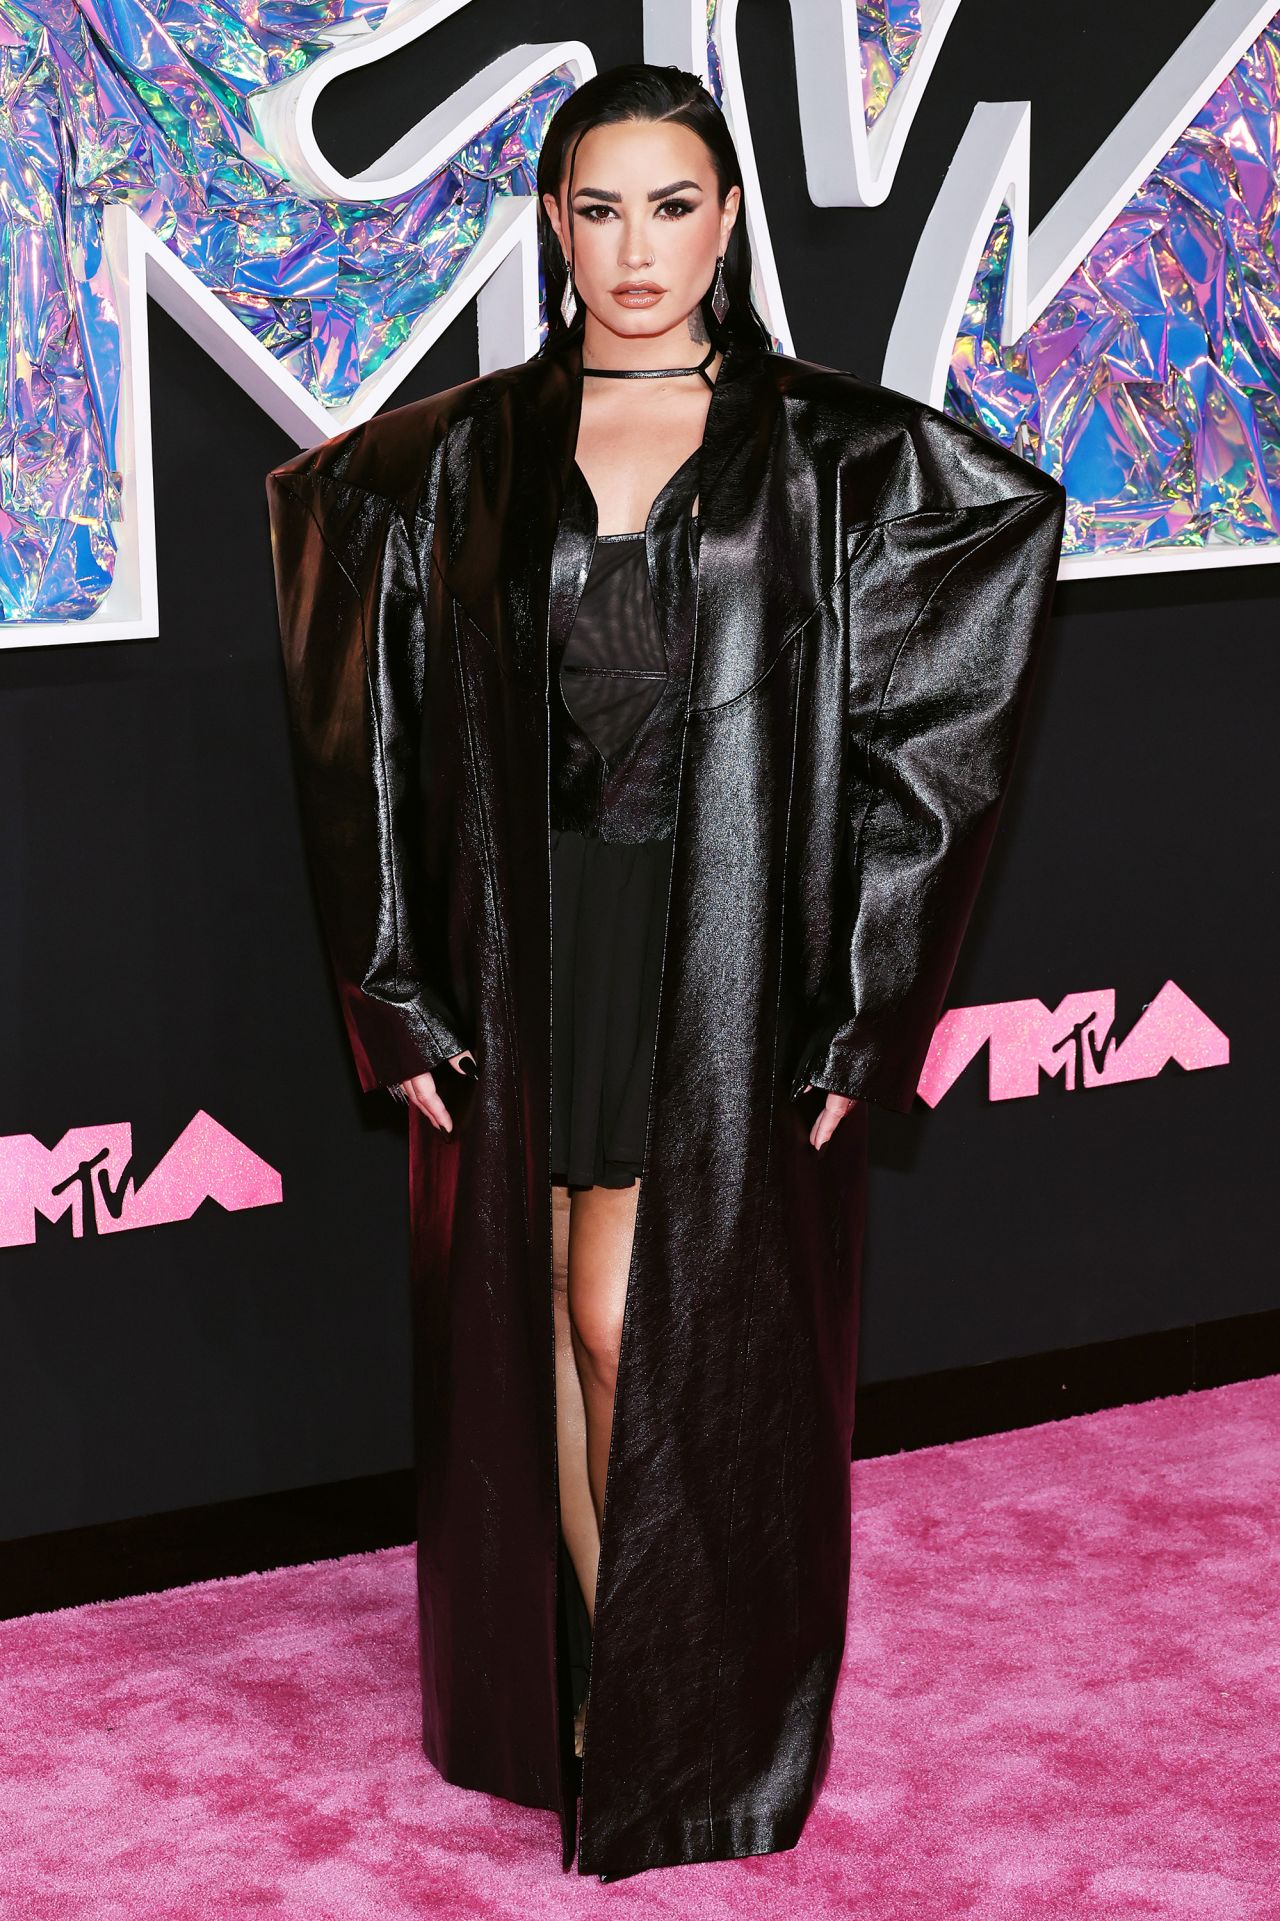 Demi Lovato looked edgy in an oversized geometric black coat layered with a mesh and leather mini dress resembling the one she wore on the cover of her forthcoming album "Revamped."  